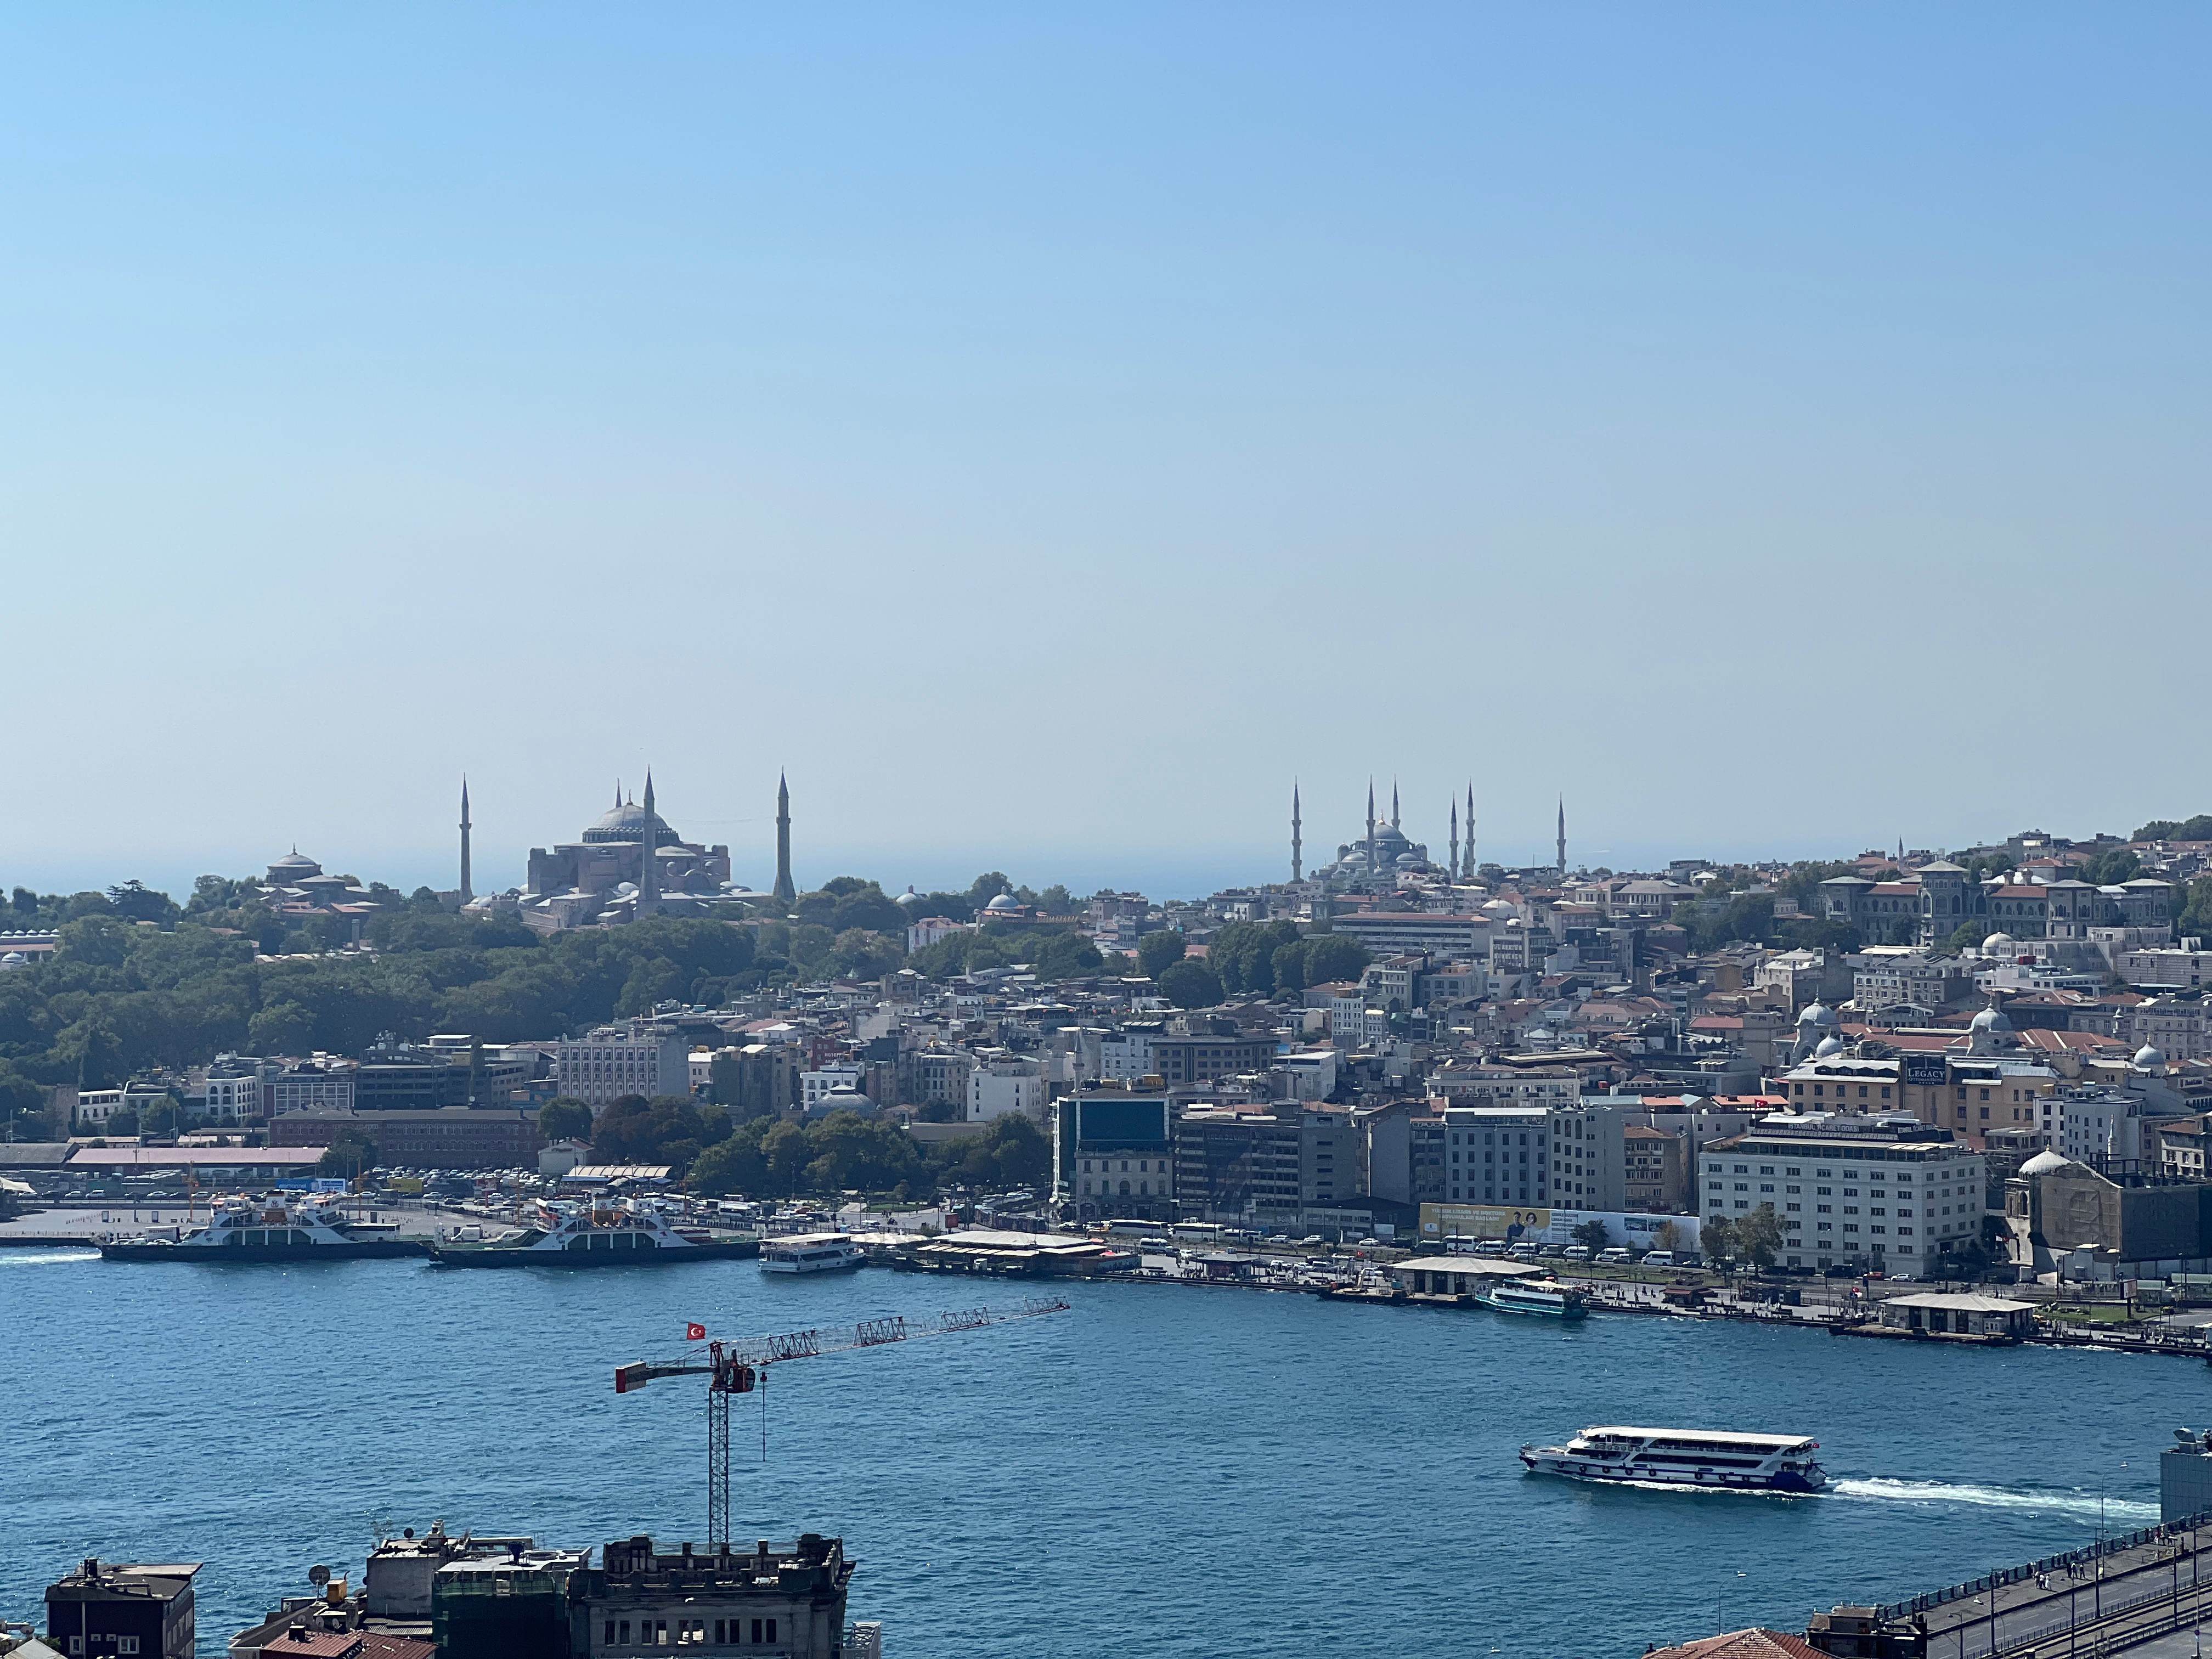 View of the Blue Mosque and Hagia Sophia from the Galata Tower